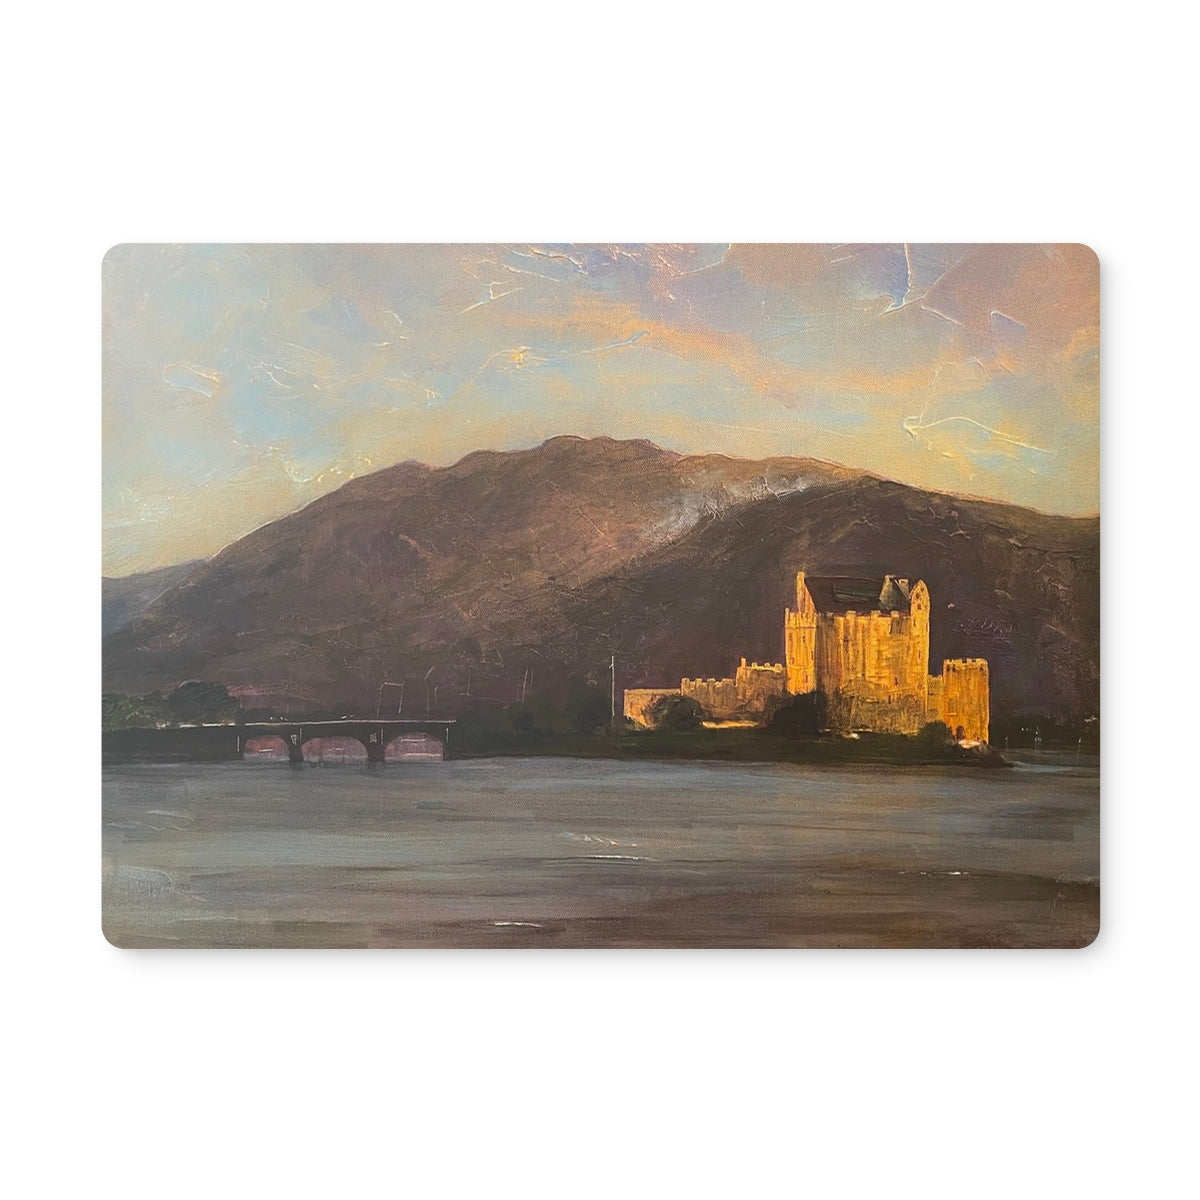 Eilean Donan Castle Art Gifts Placemat-Placemats-Historic & Iconic Scotland Art Gallery-4 Placemats-Paintings, Prints, Homeware, Art Gifts From Scotland By Scottish Artist Kevin Hunter